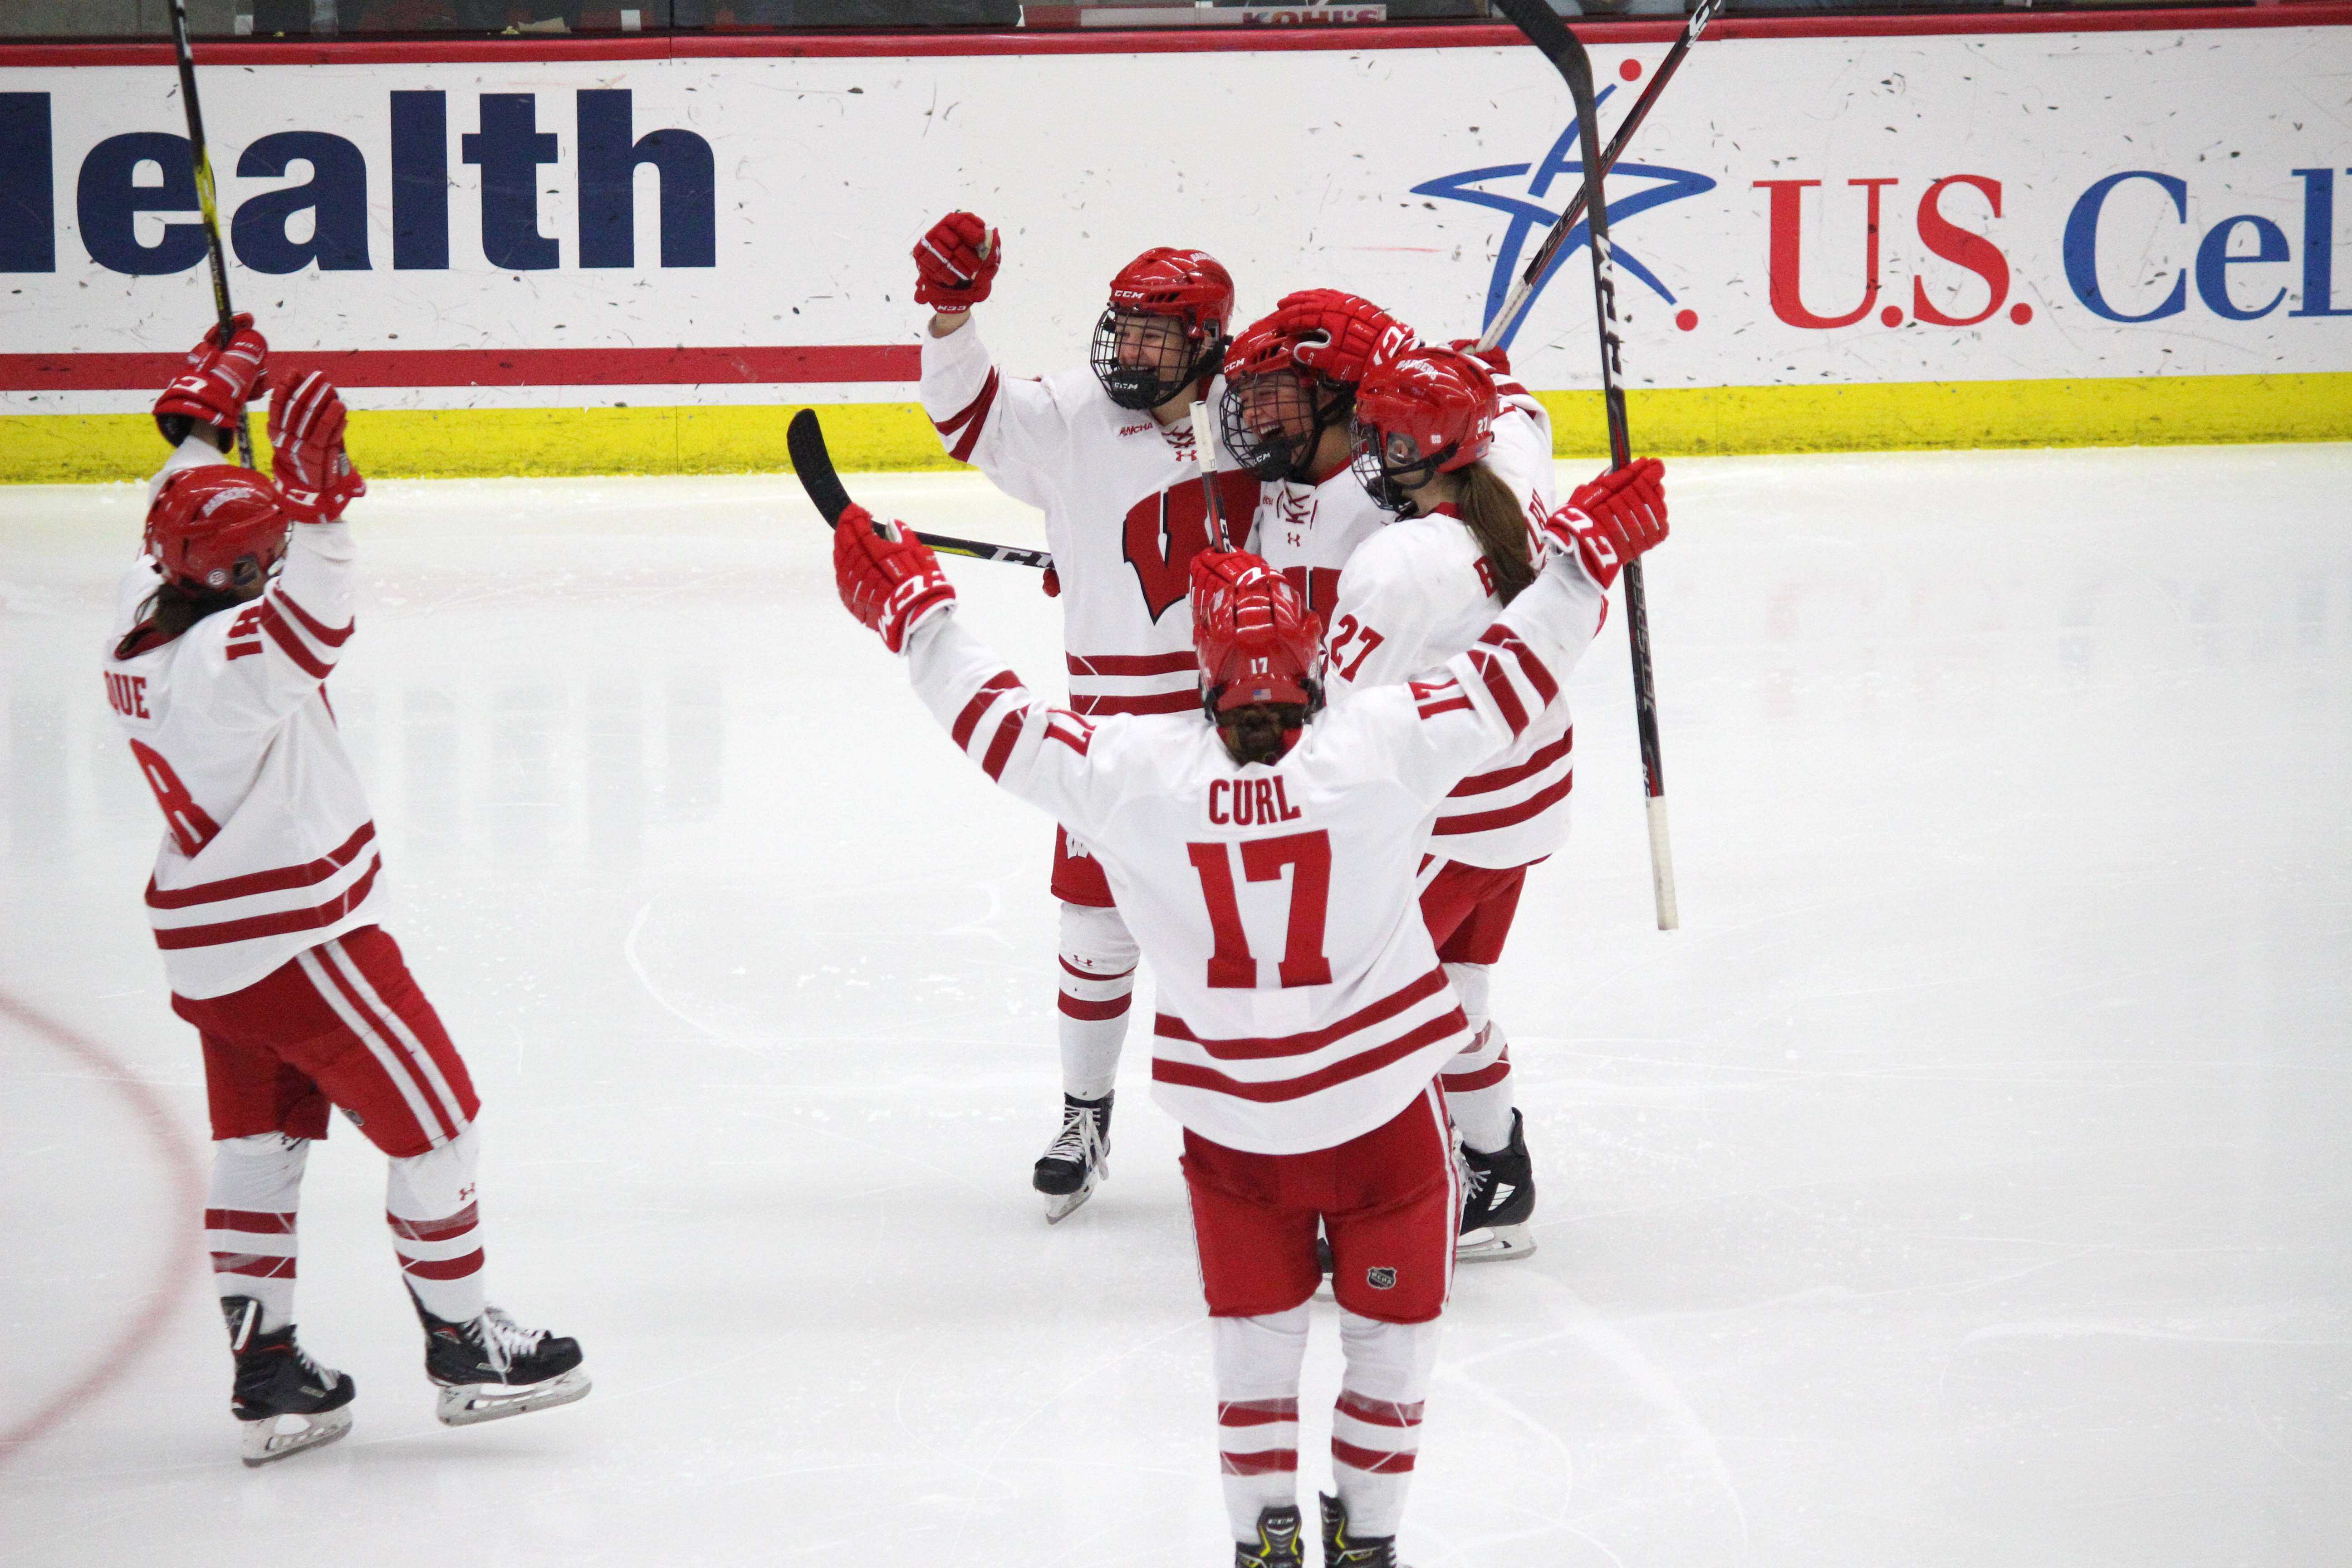 Thoughts from the Wisconsin sweep over Duluth + more